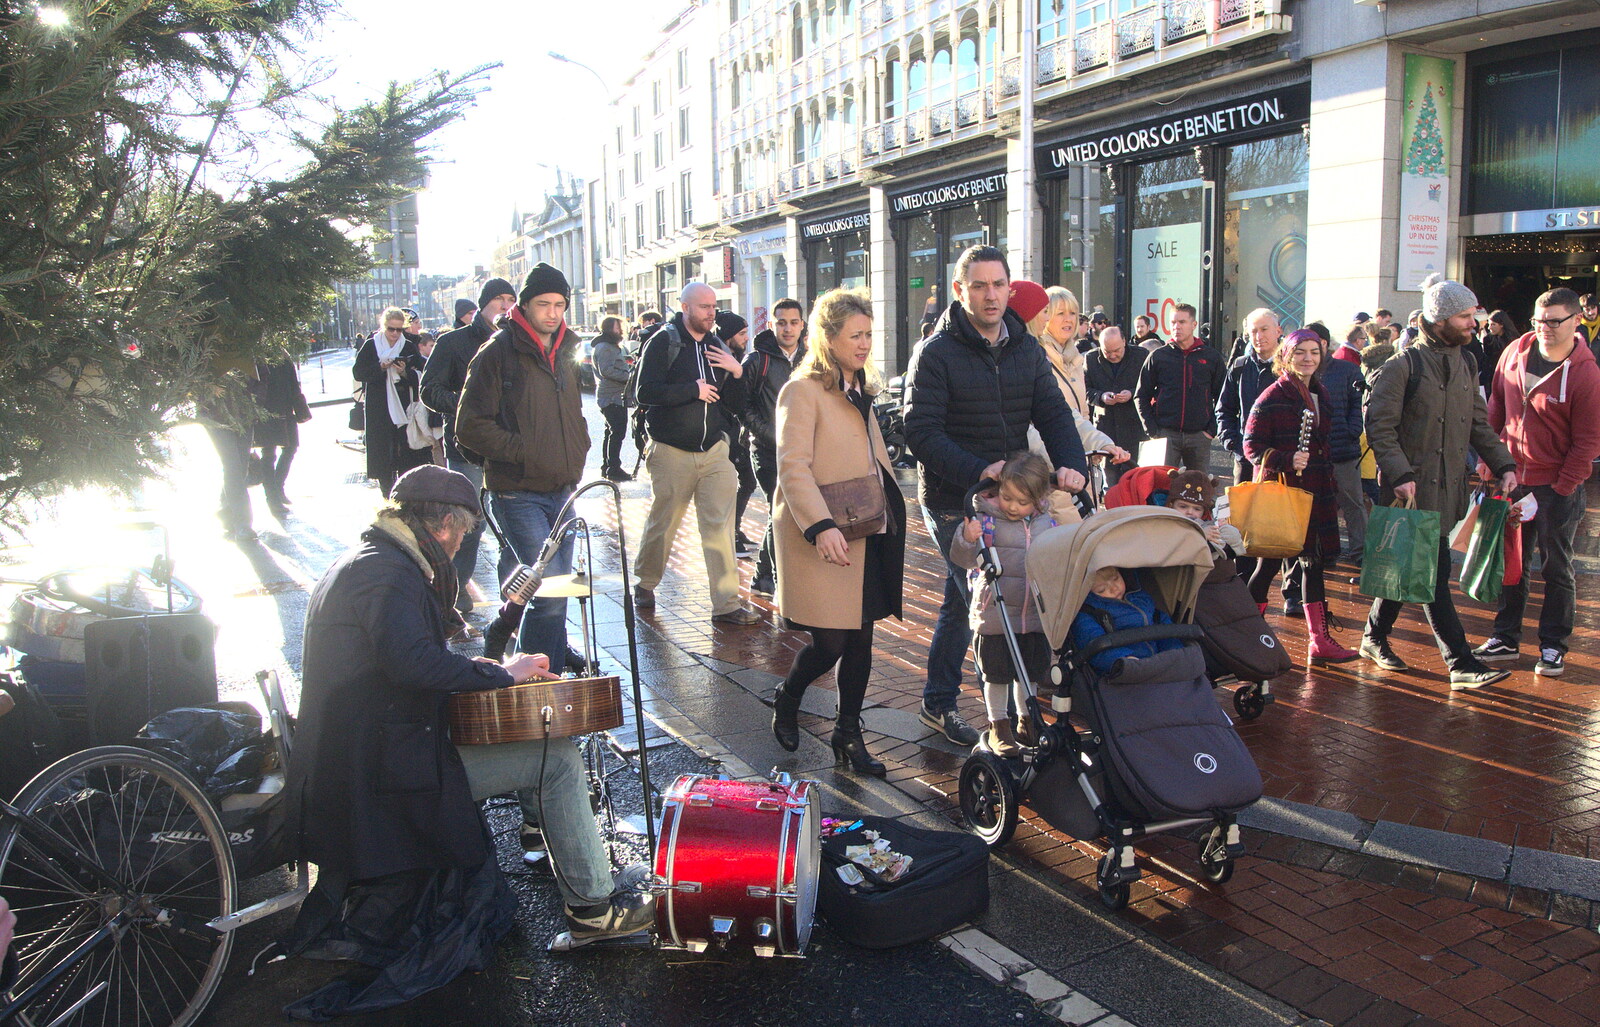 Slide-guitar busking at the top of Grafton Street from Christmas Eve in Dublin and Blackrock, Ireland - 24th December 2015